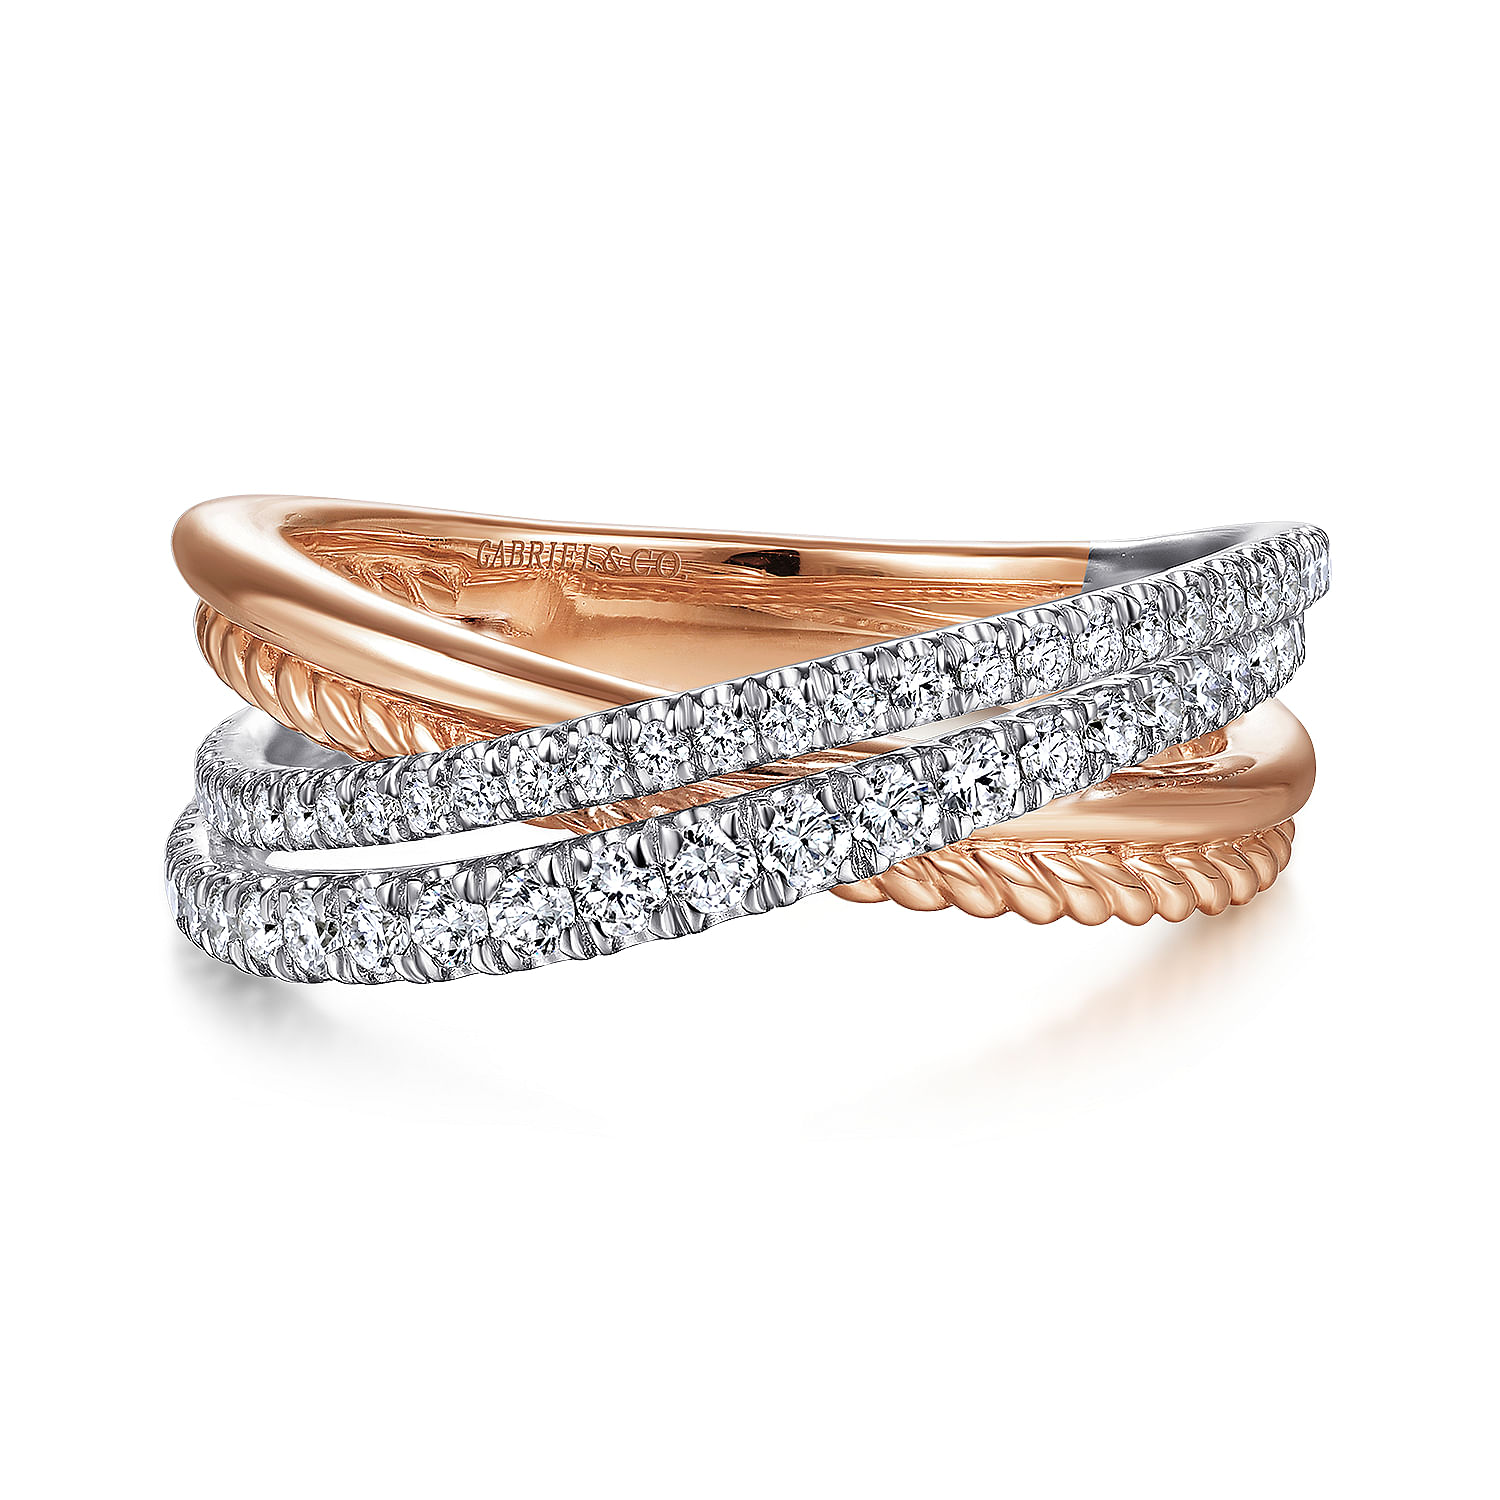 14K White-Rose Gold Twisted Rope and Diamond Criss Cross Ring